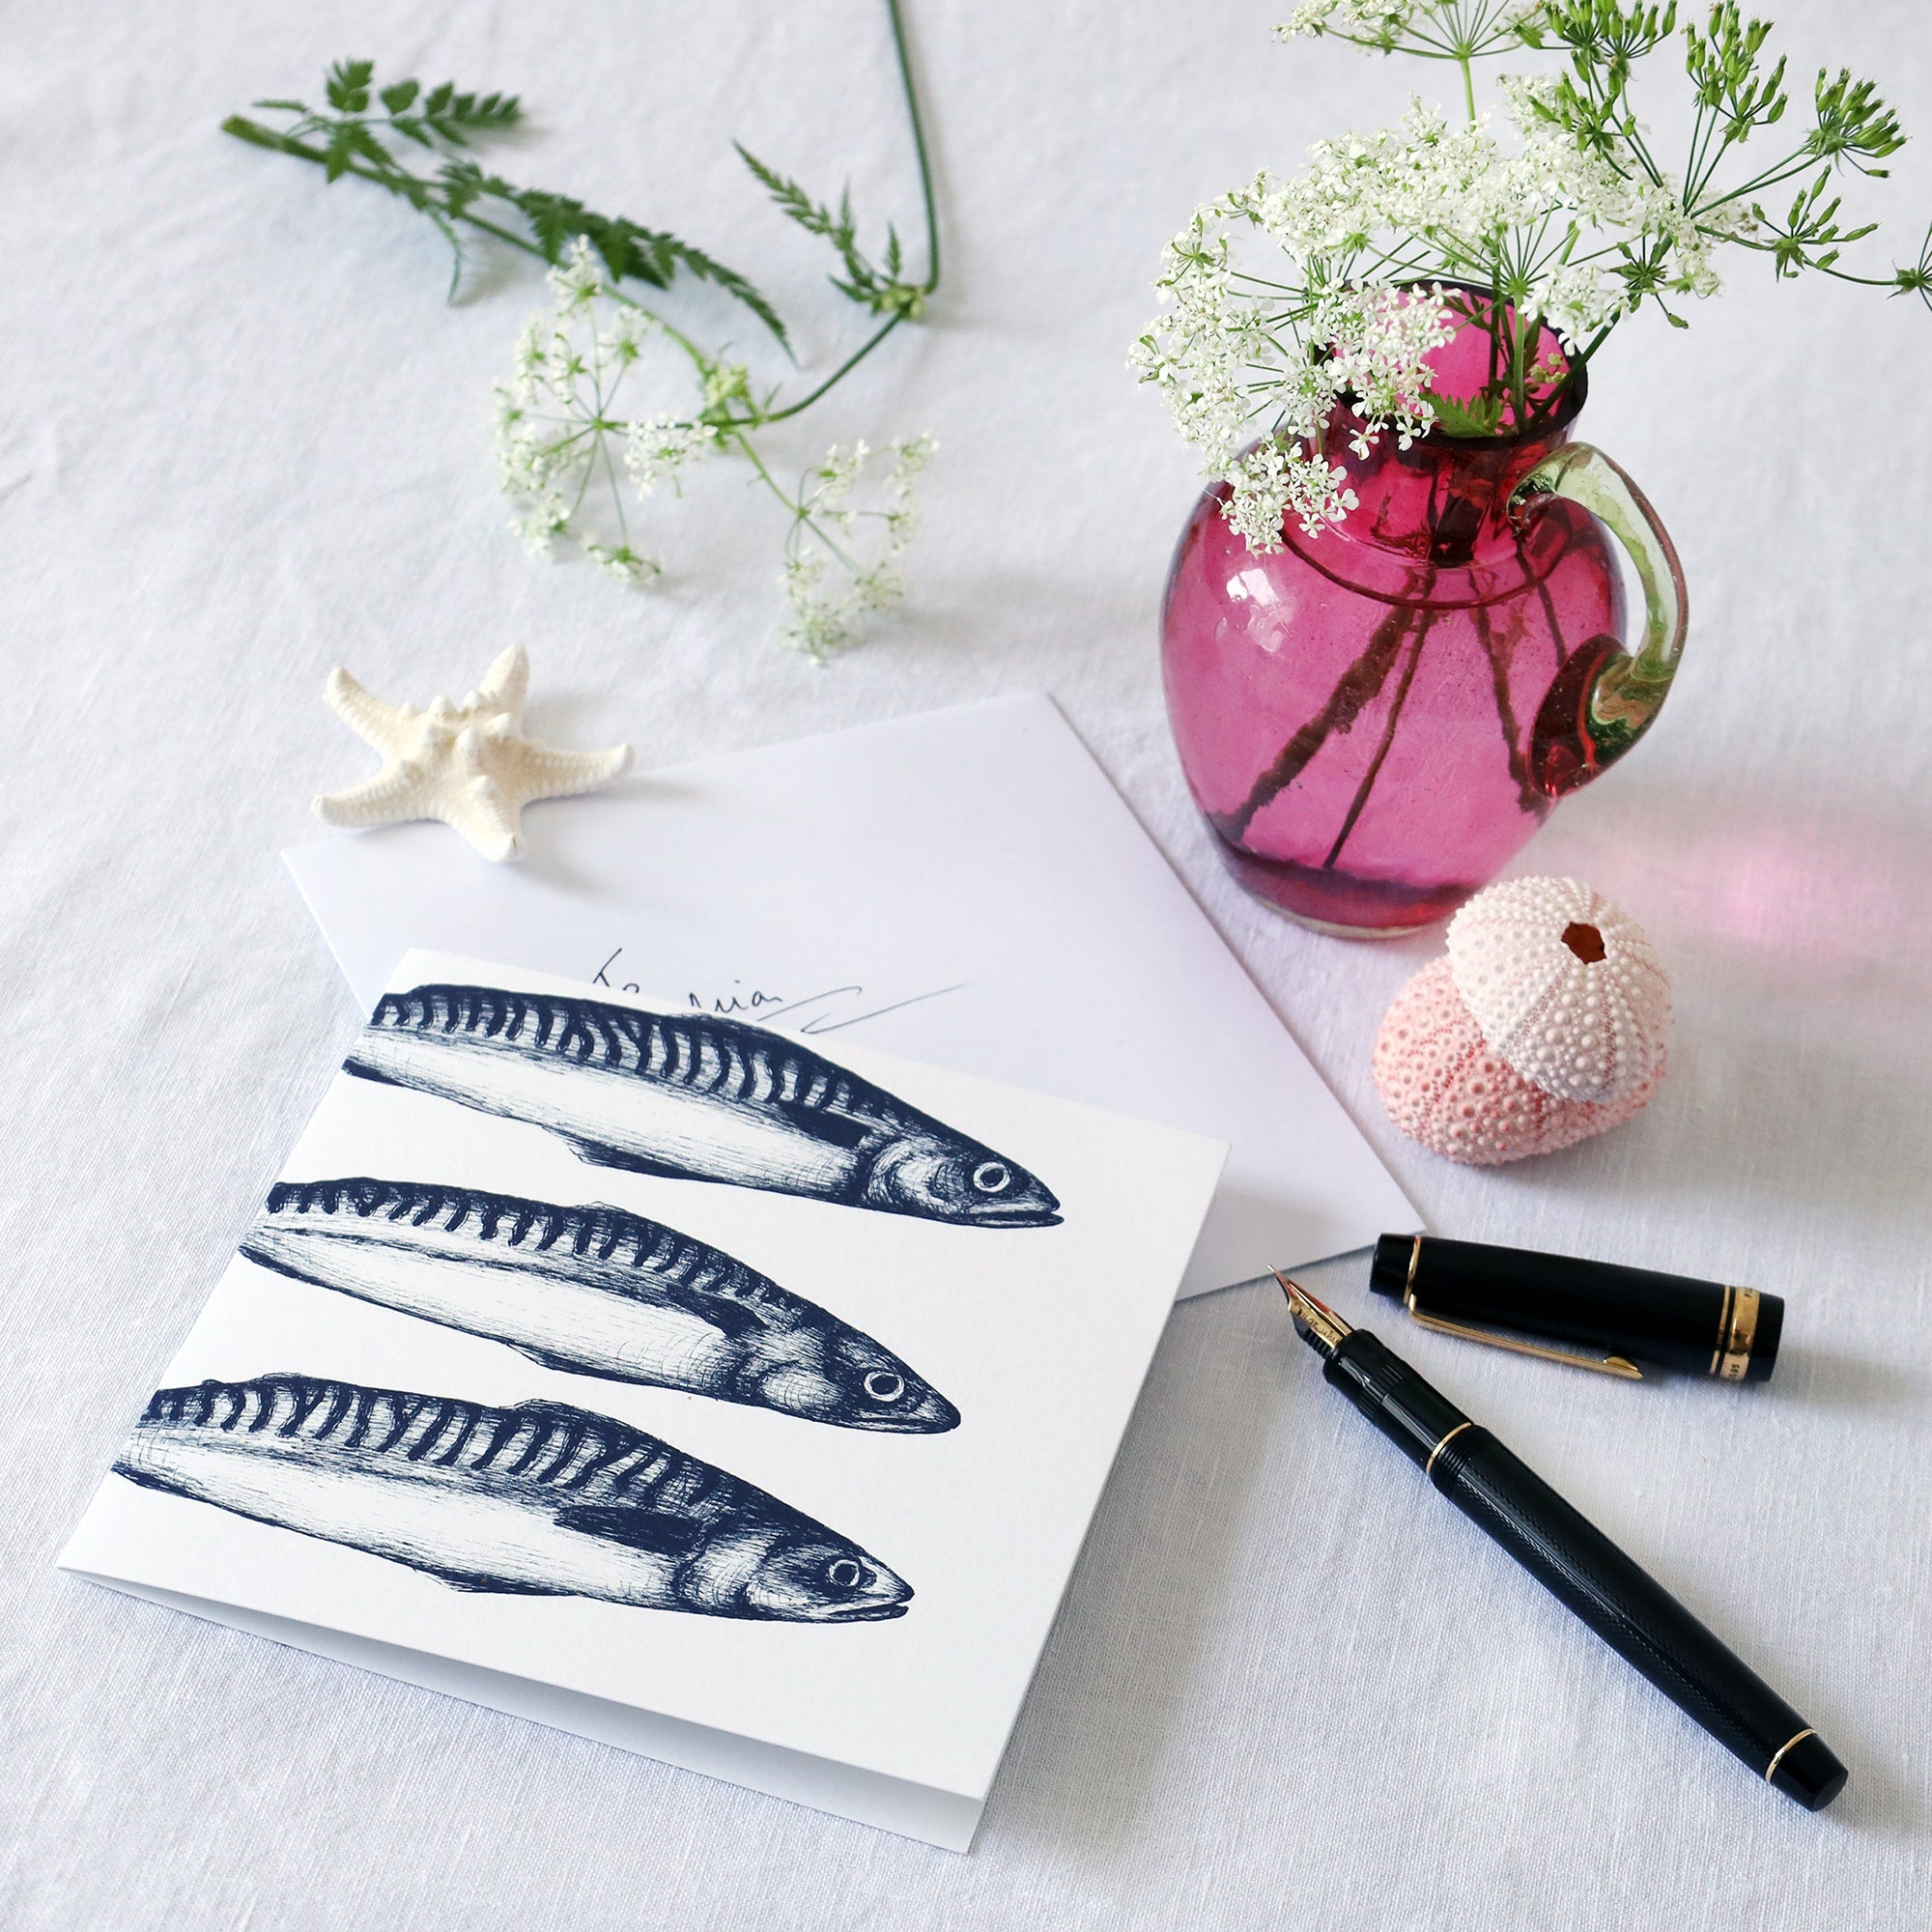 greeting card with navy illustration of 3 mackerel without tails on a white background lying on a white table cloth with a fountain pen, hand written envelope shells and a small cranberry glass jug with wild flowers in